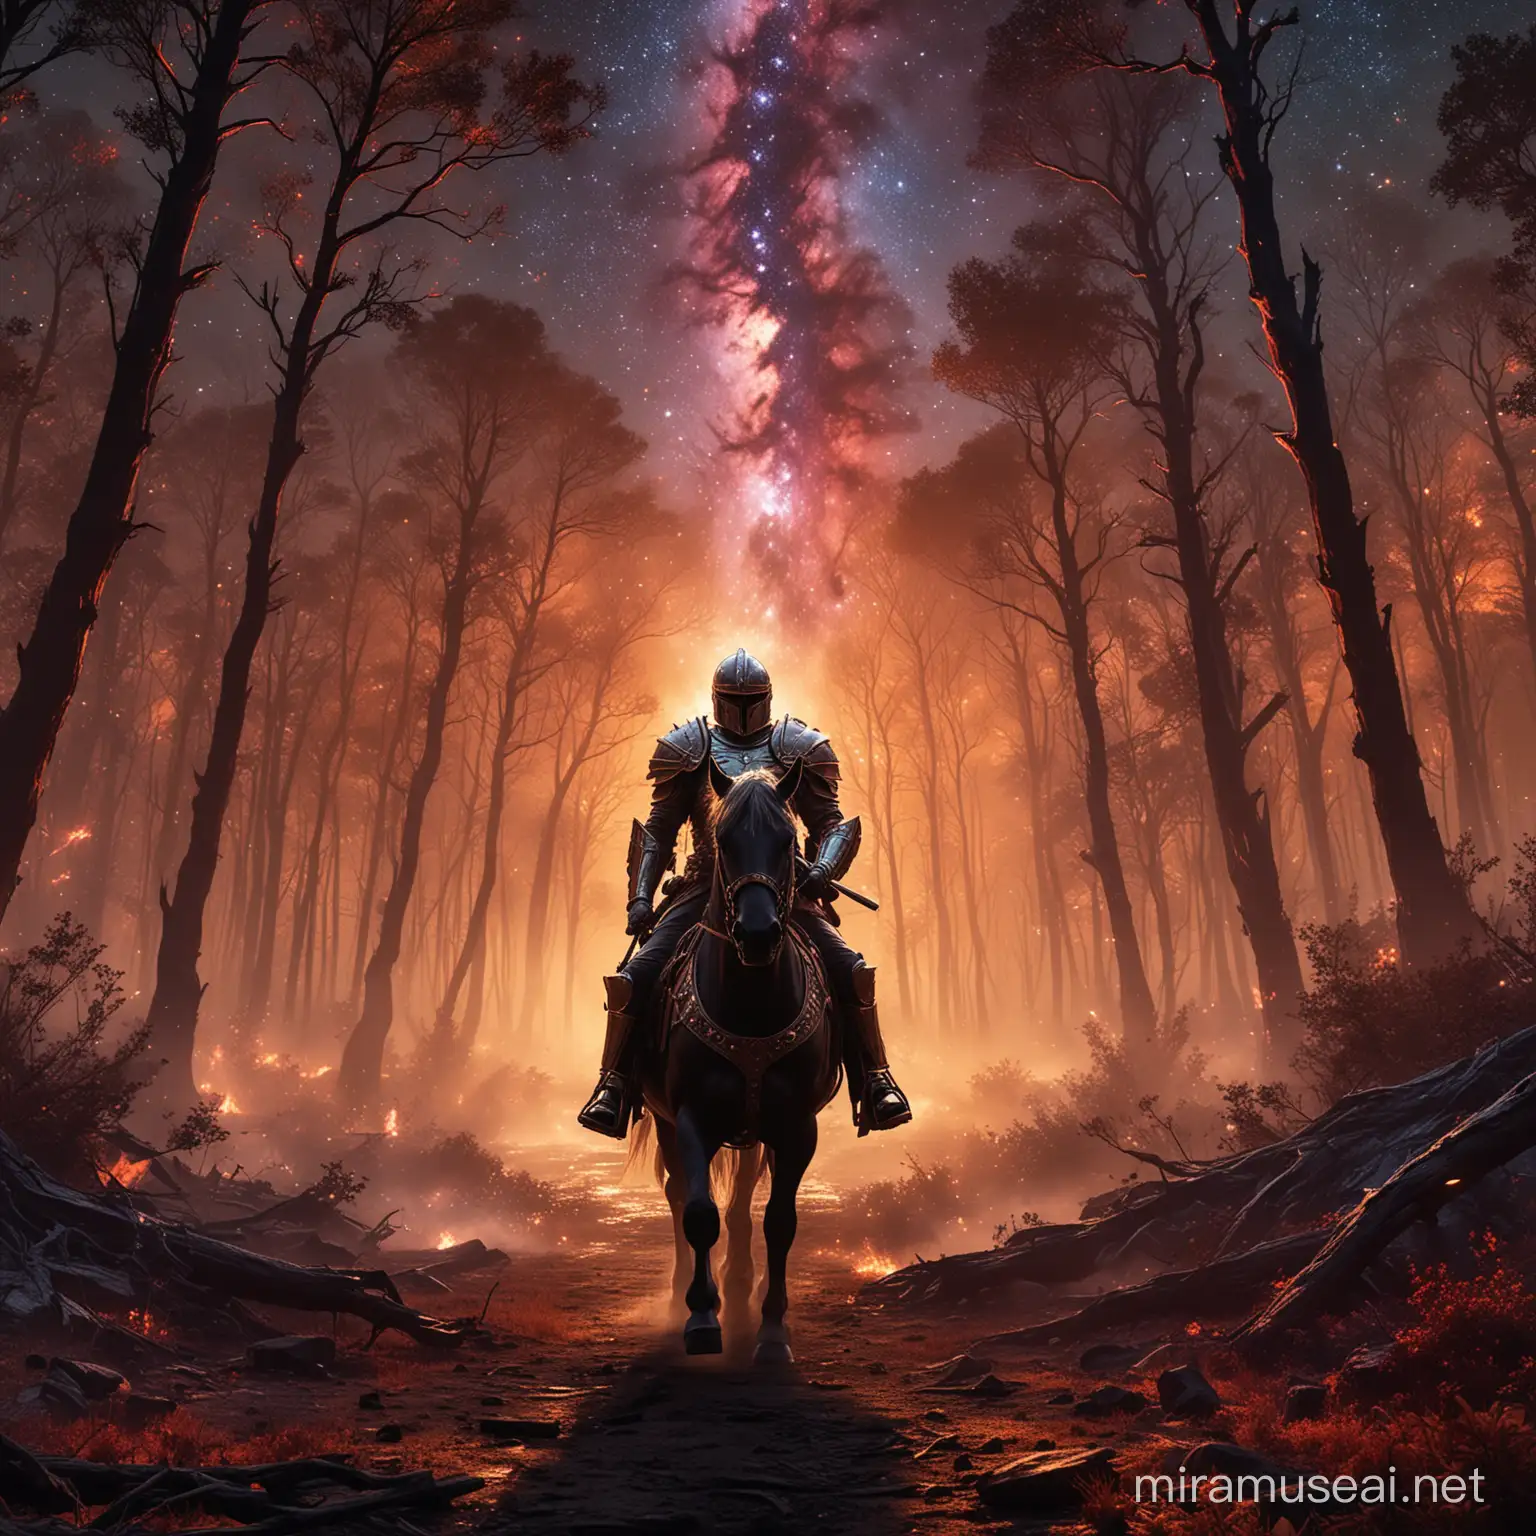 In a stunning 4K ultra HD shot, the cosmic knight riders emerge from the engulfed woods, their presence ethereal yet resolute against the backdrop of blazing infernos. Clad in celestial armor that gleams with otherworldly luminescence, they ride forth on majestic steeds whose hooves leave trails of stardust in their wake.

As the flames lick at the edges of the forest, the cosmic knights charge forward, their swords aglow with the power of distant galaxies. Behind them, cinematic backgrounds showcase the grandeur of the cosmos, with swirling nebulas and distant star clusters painting the sky in hues of cosmic wonder.

With each stride, the cosmic knights defy the chaos of the inferno, their purpose clear as they venture forth to restore balance to the universe. This breathtaking scene captures the essence of their celestial quest, a masterpiece of both beauty and bravery in the face of cosmic turmoil, cinematic looks, mesmerizing backgrounds, 4k ultra HD 